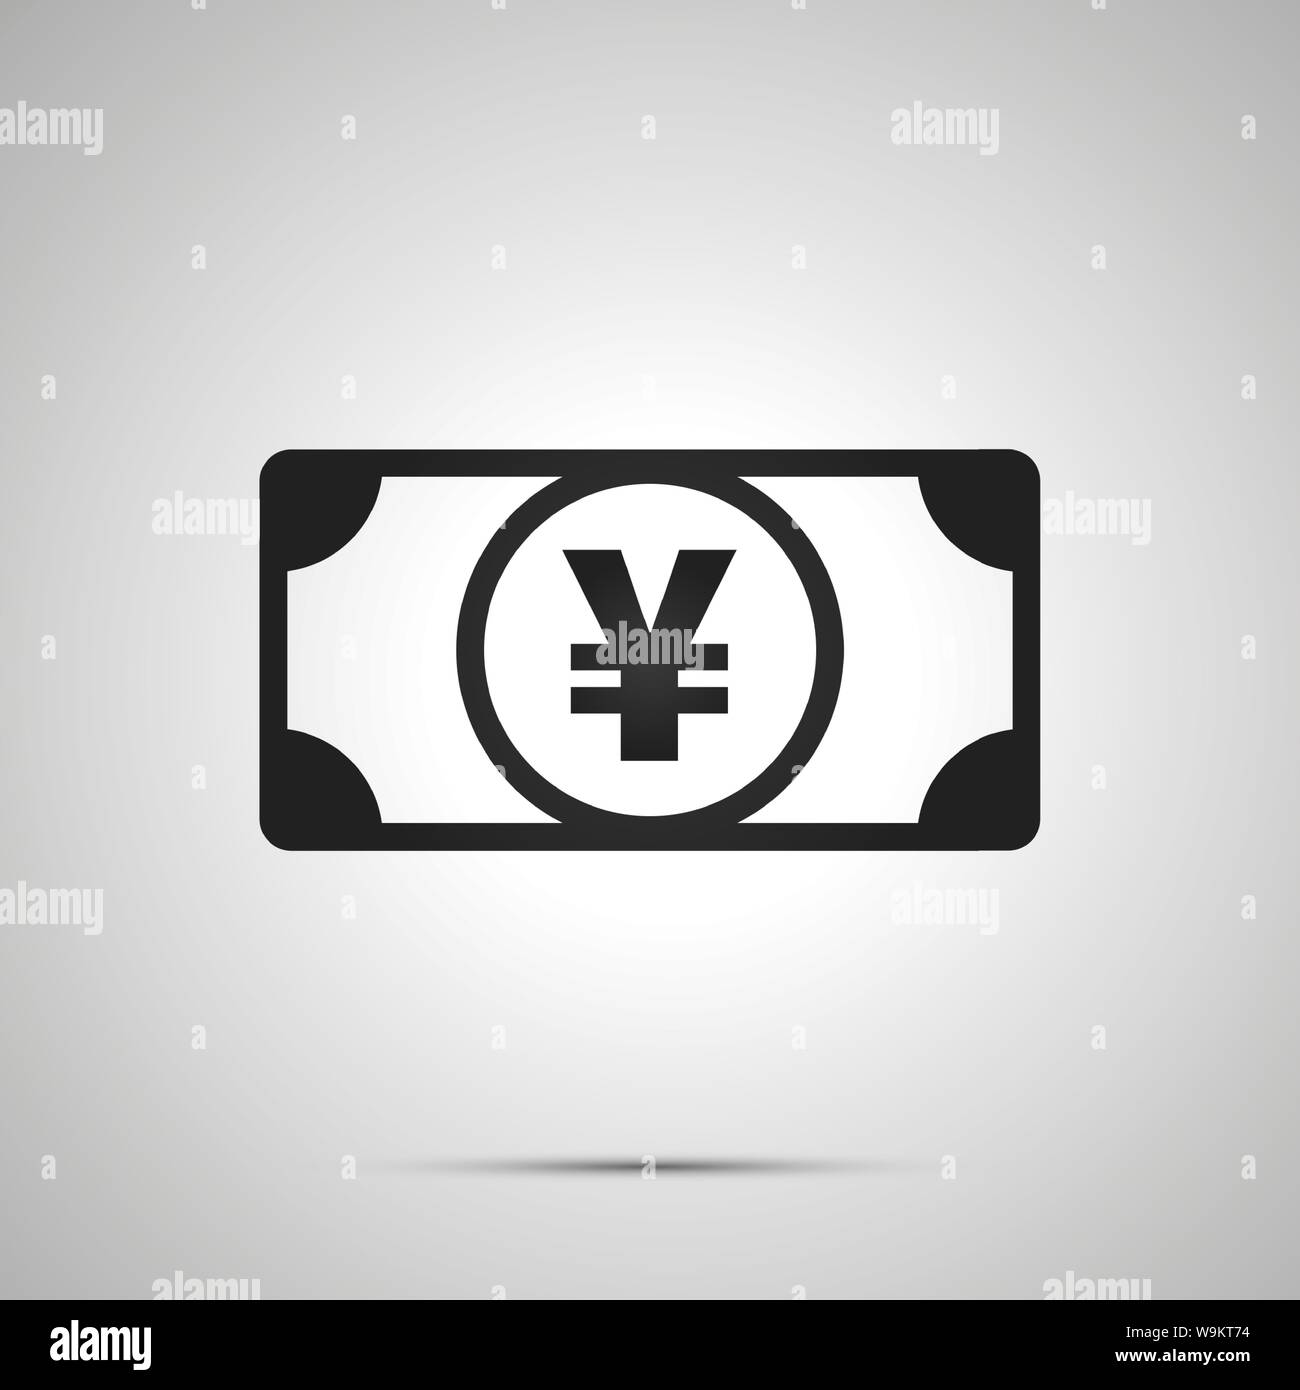 Abstract money banknote with JPY sign, simple black icon with shadow on gray Stock Vector